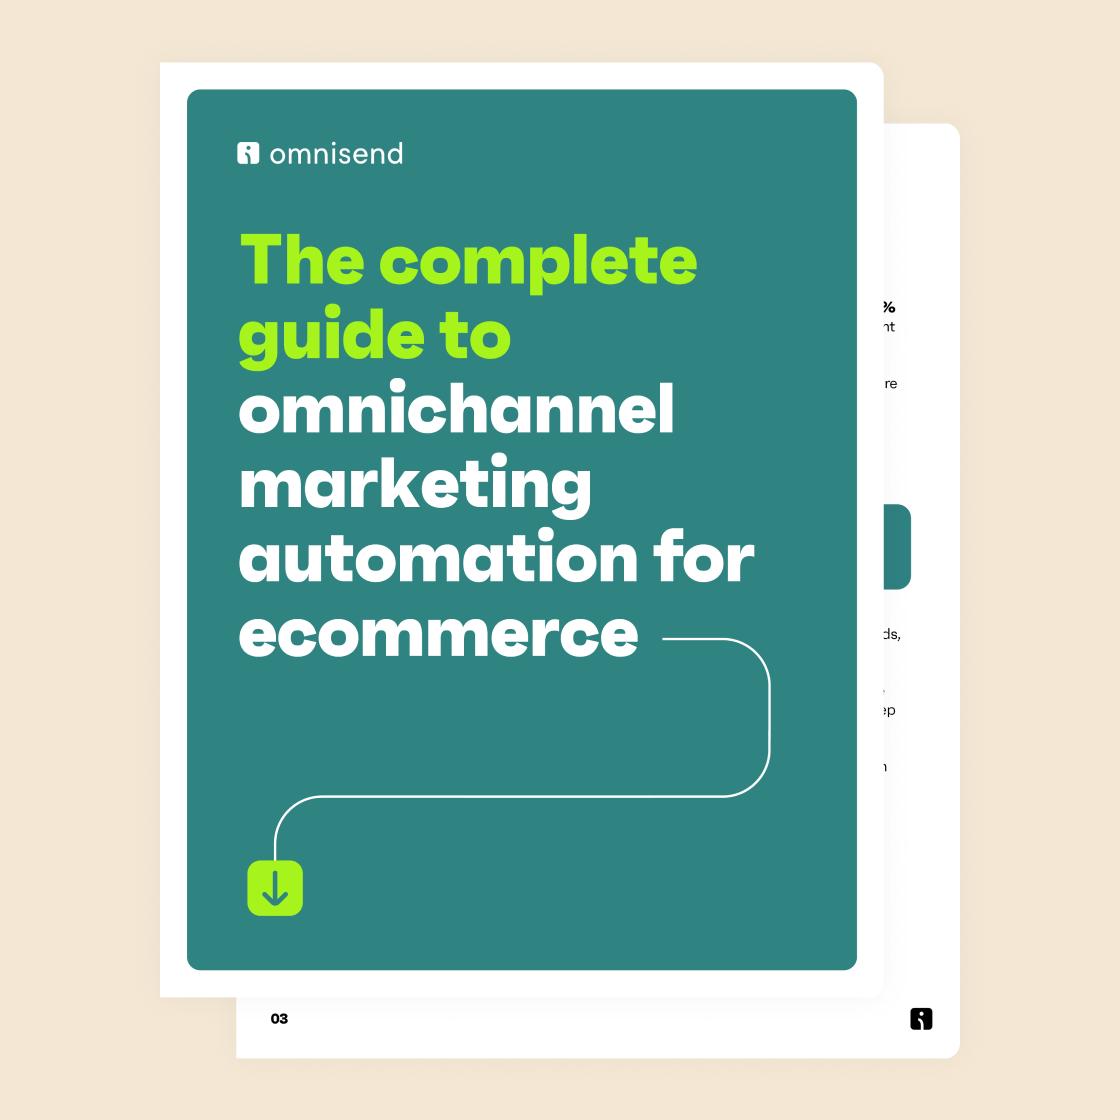 The complete guide to omnichannel marketing automation